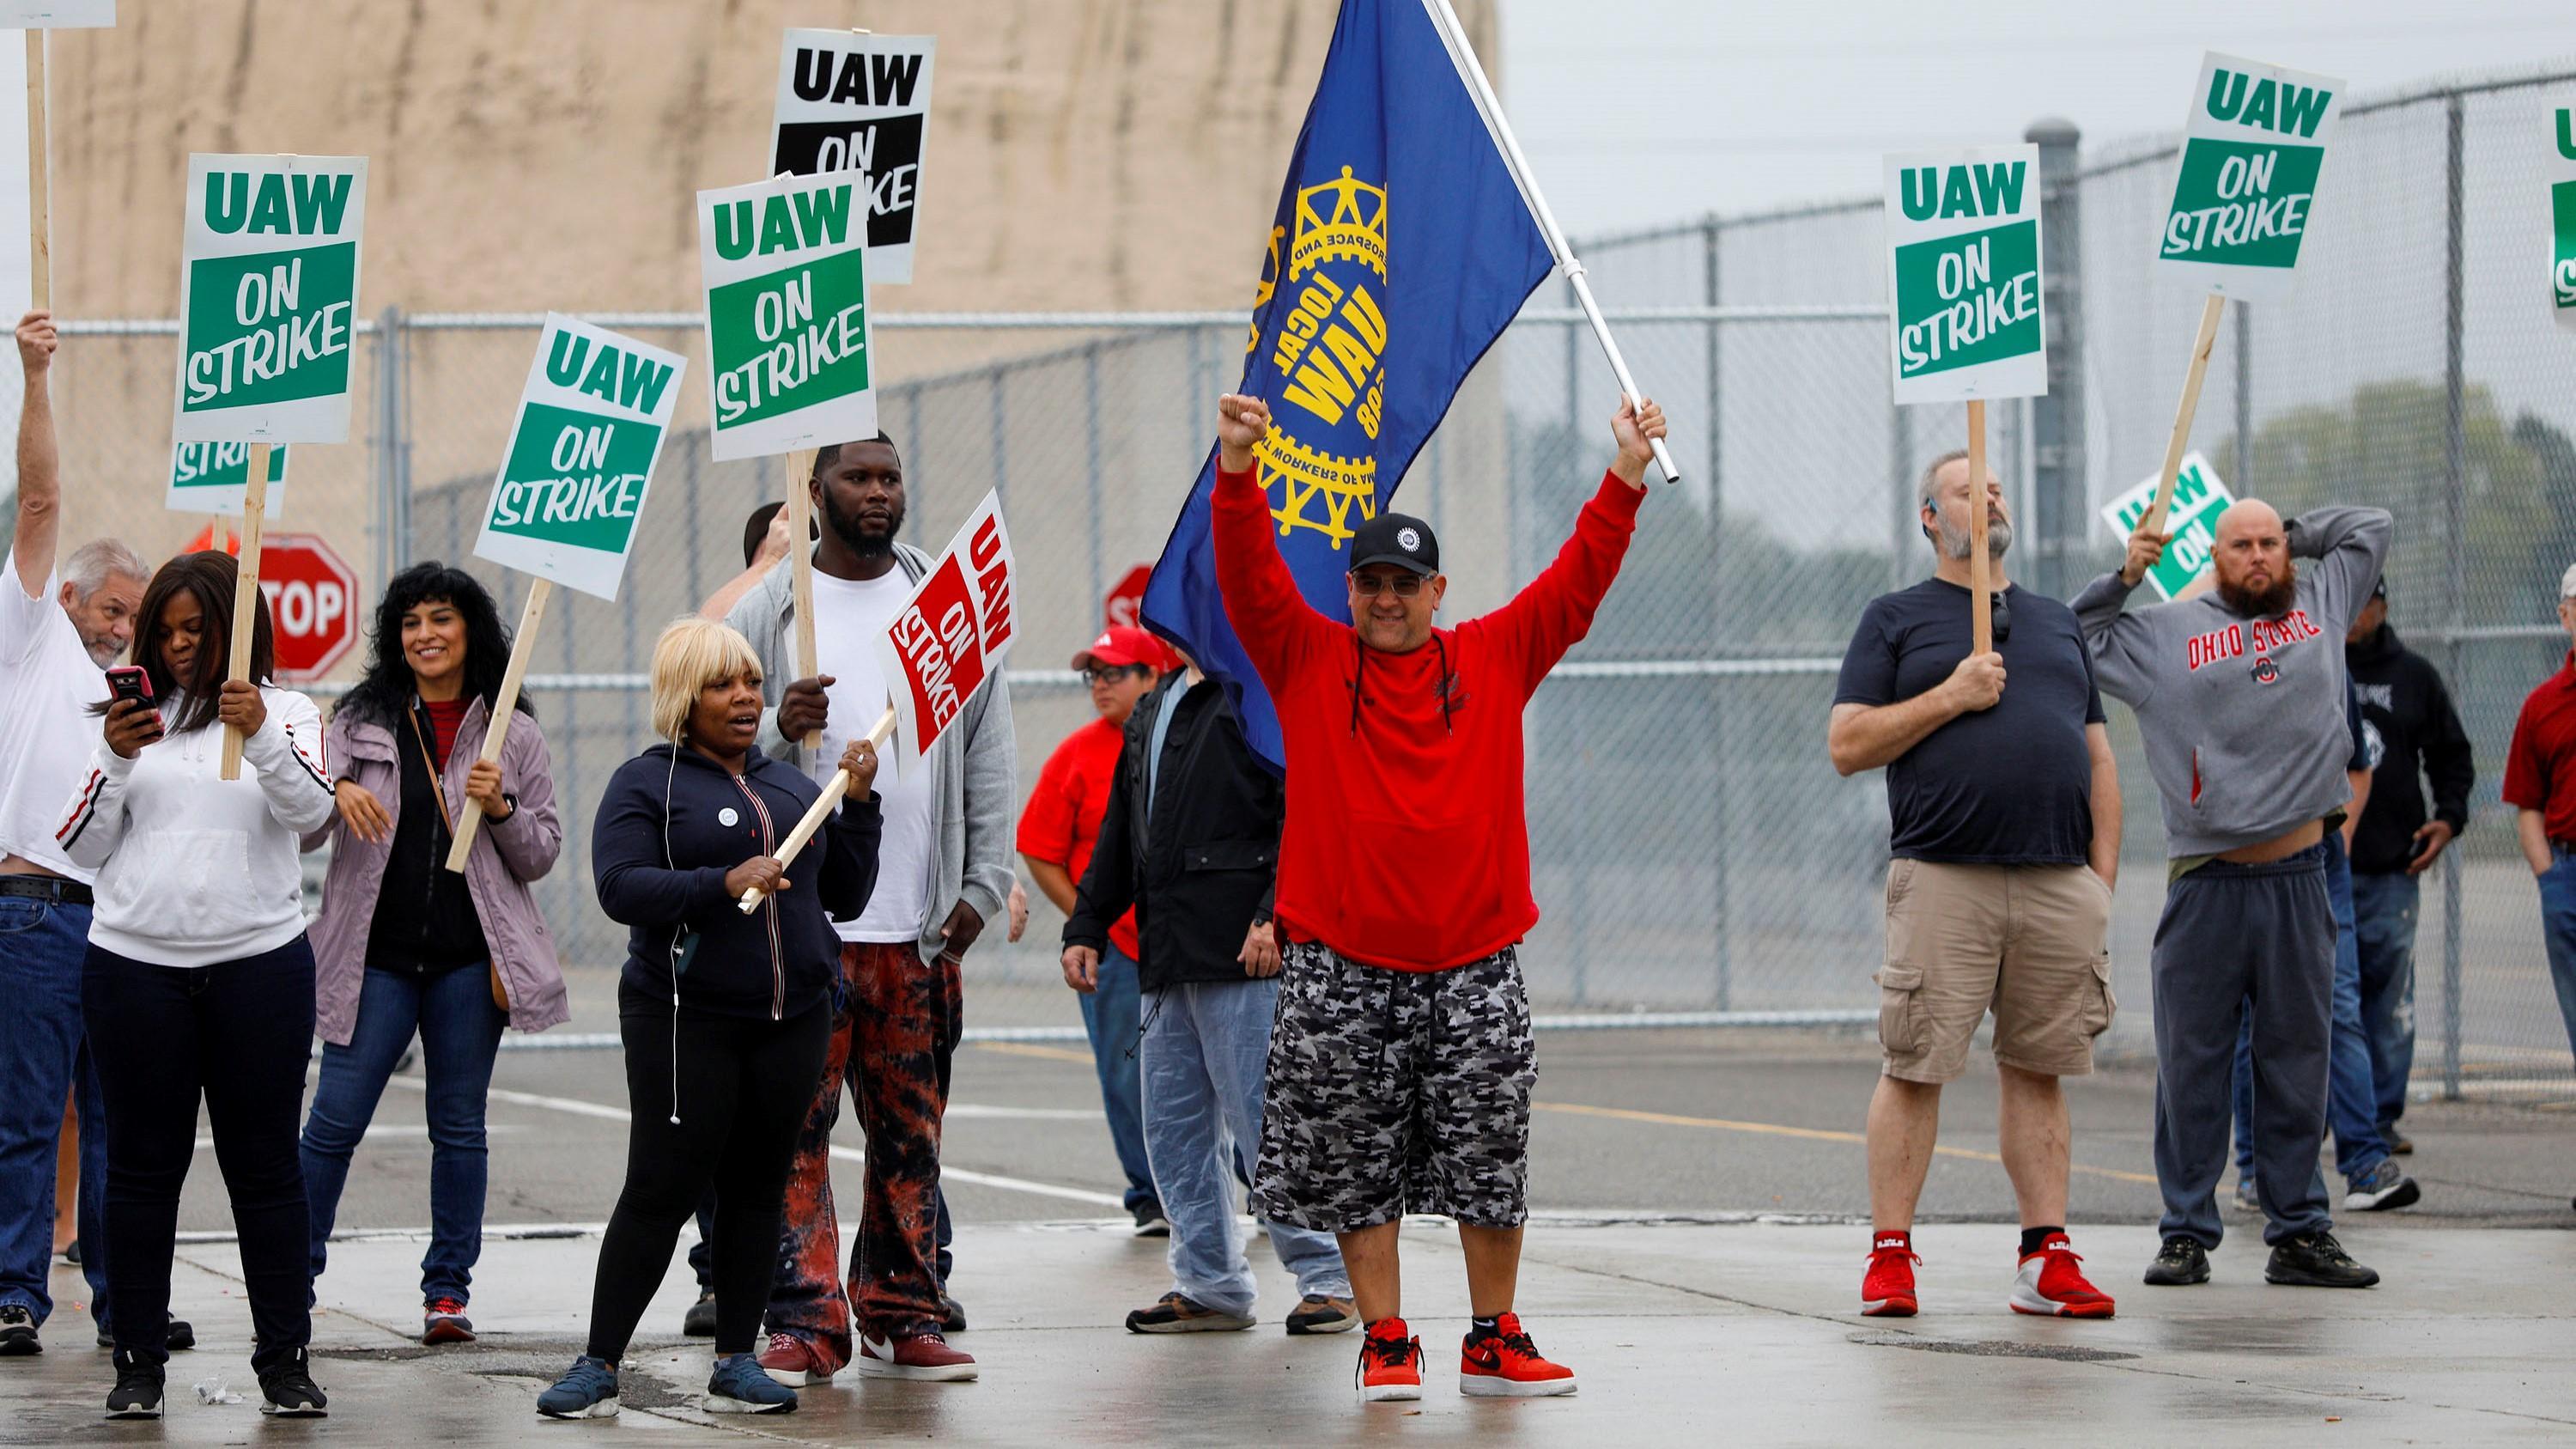 UAW Protestors with strike signs